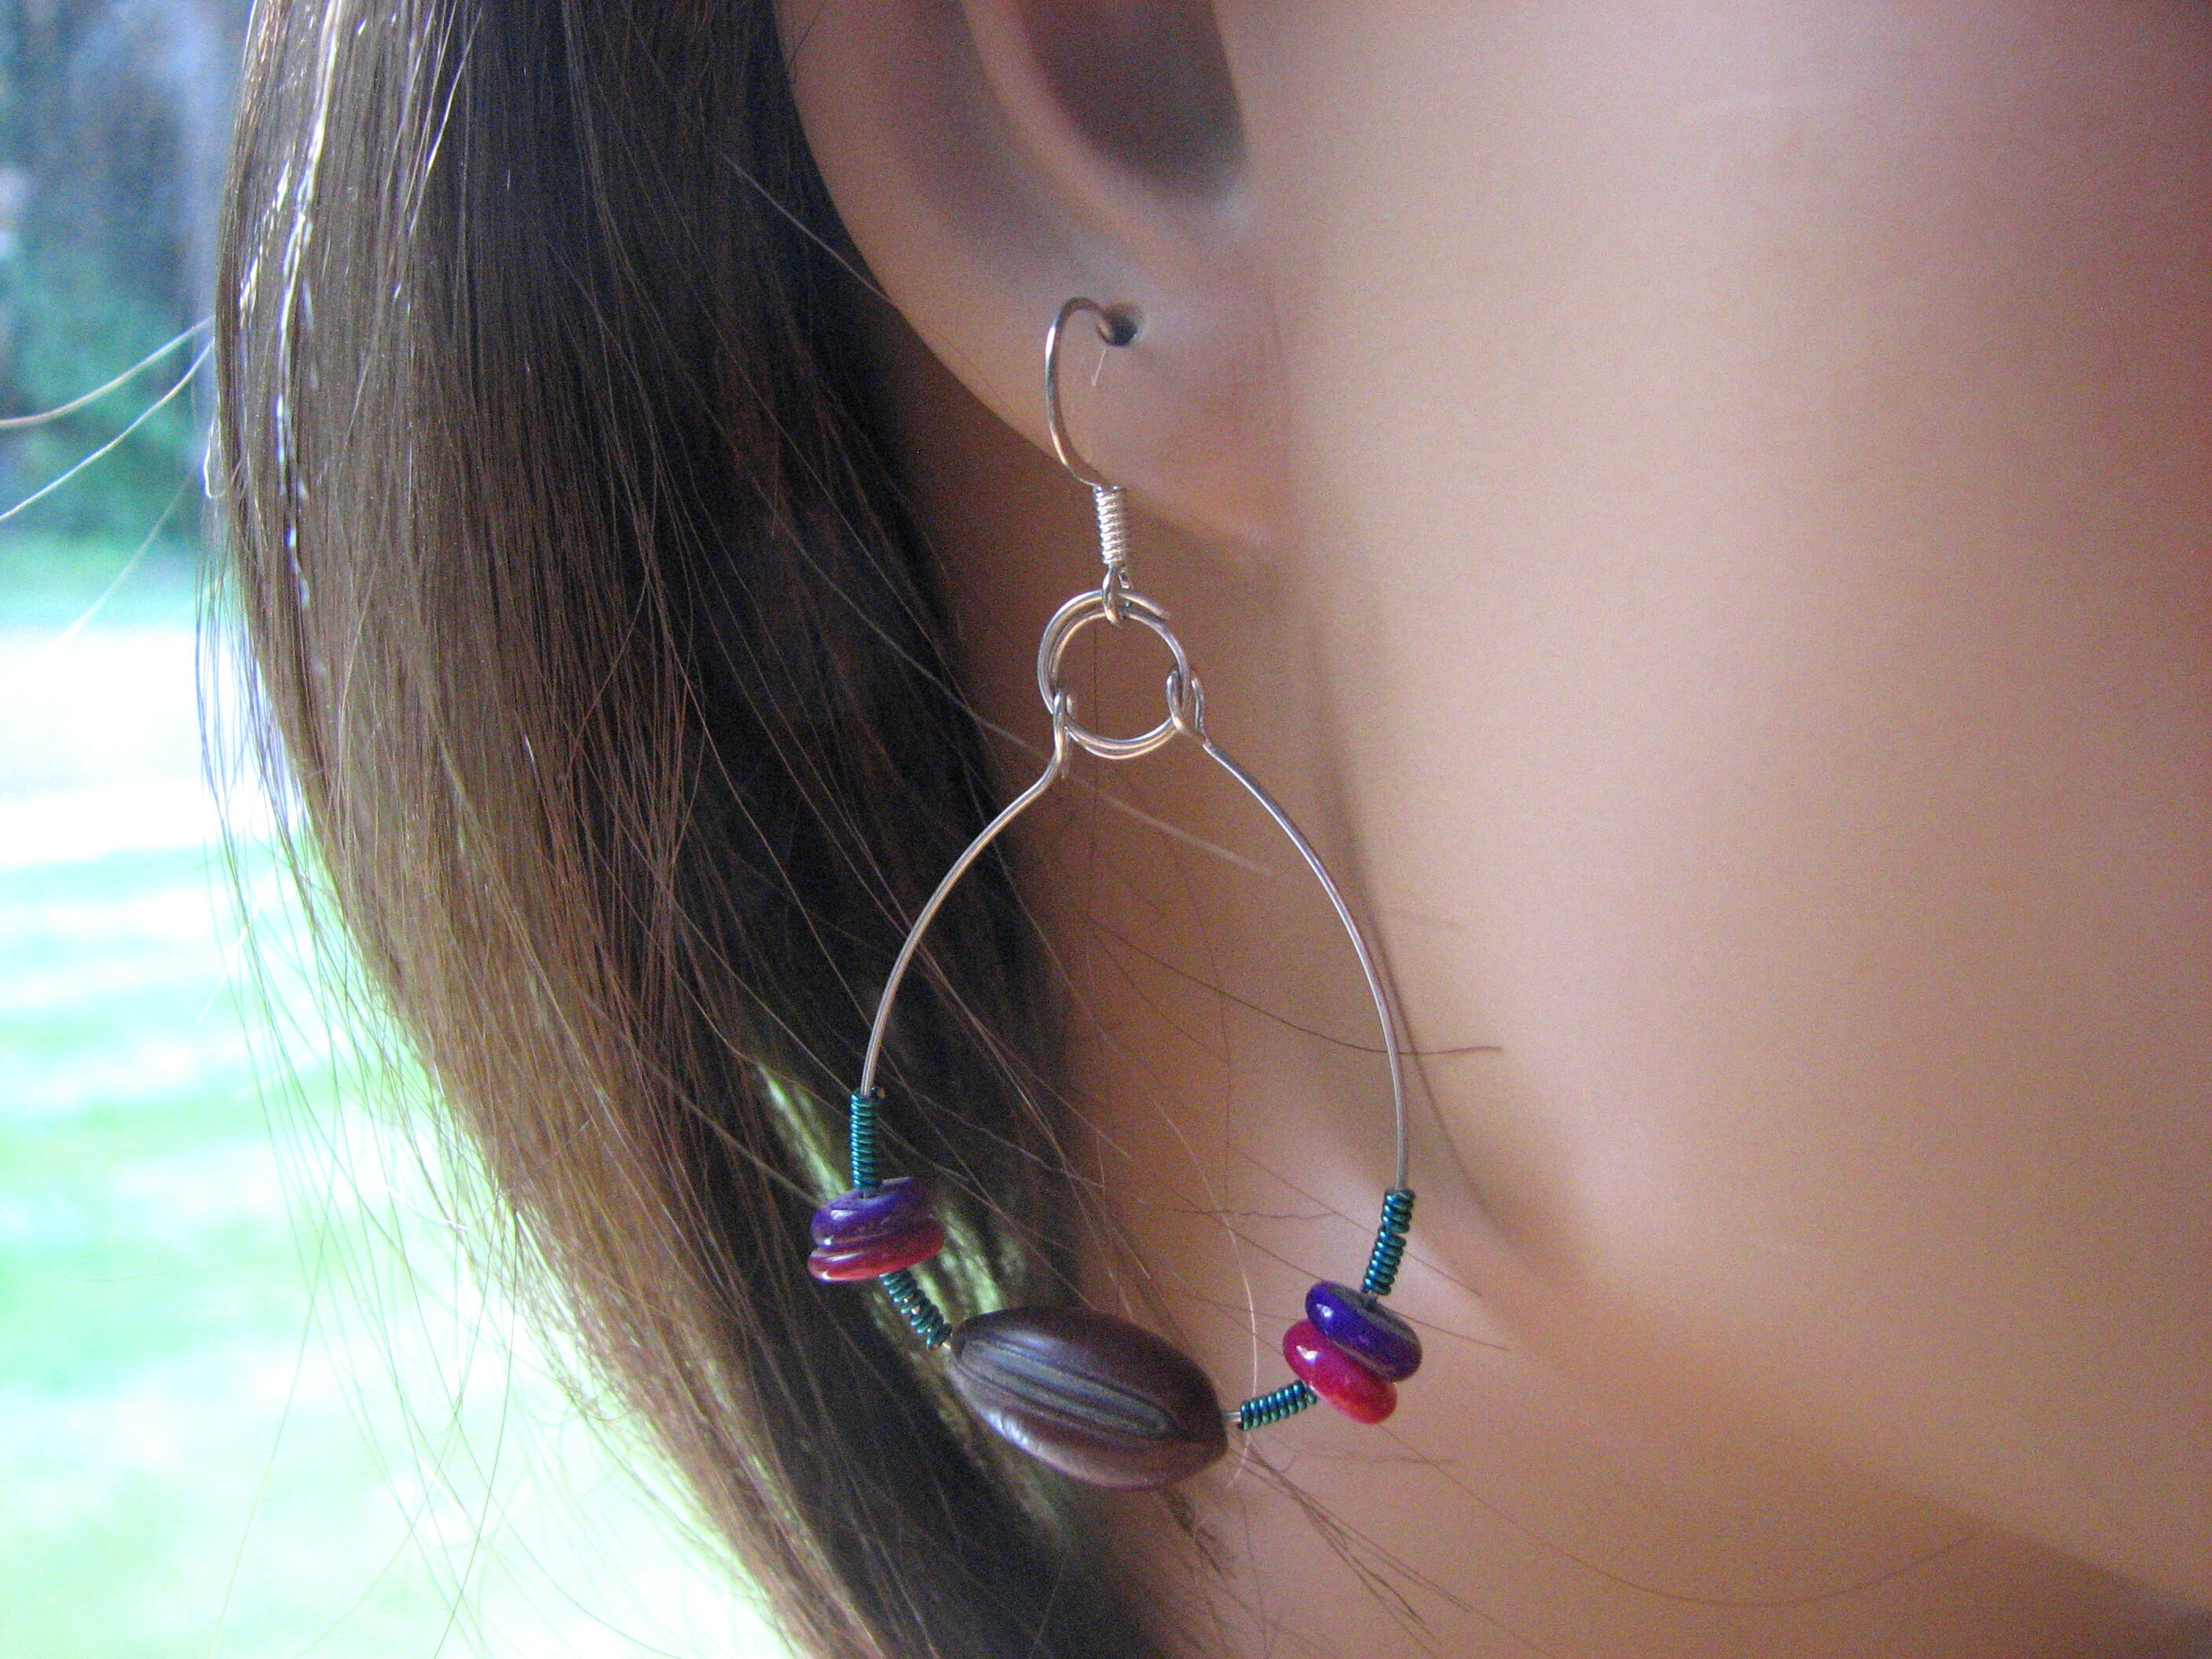 Hoops made with silver-filled wire, Stainless steel ear wires.